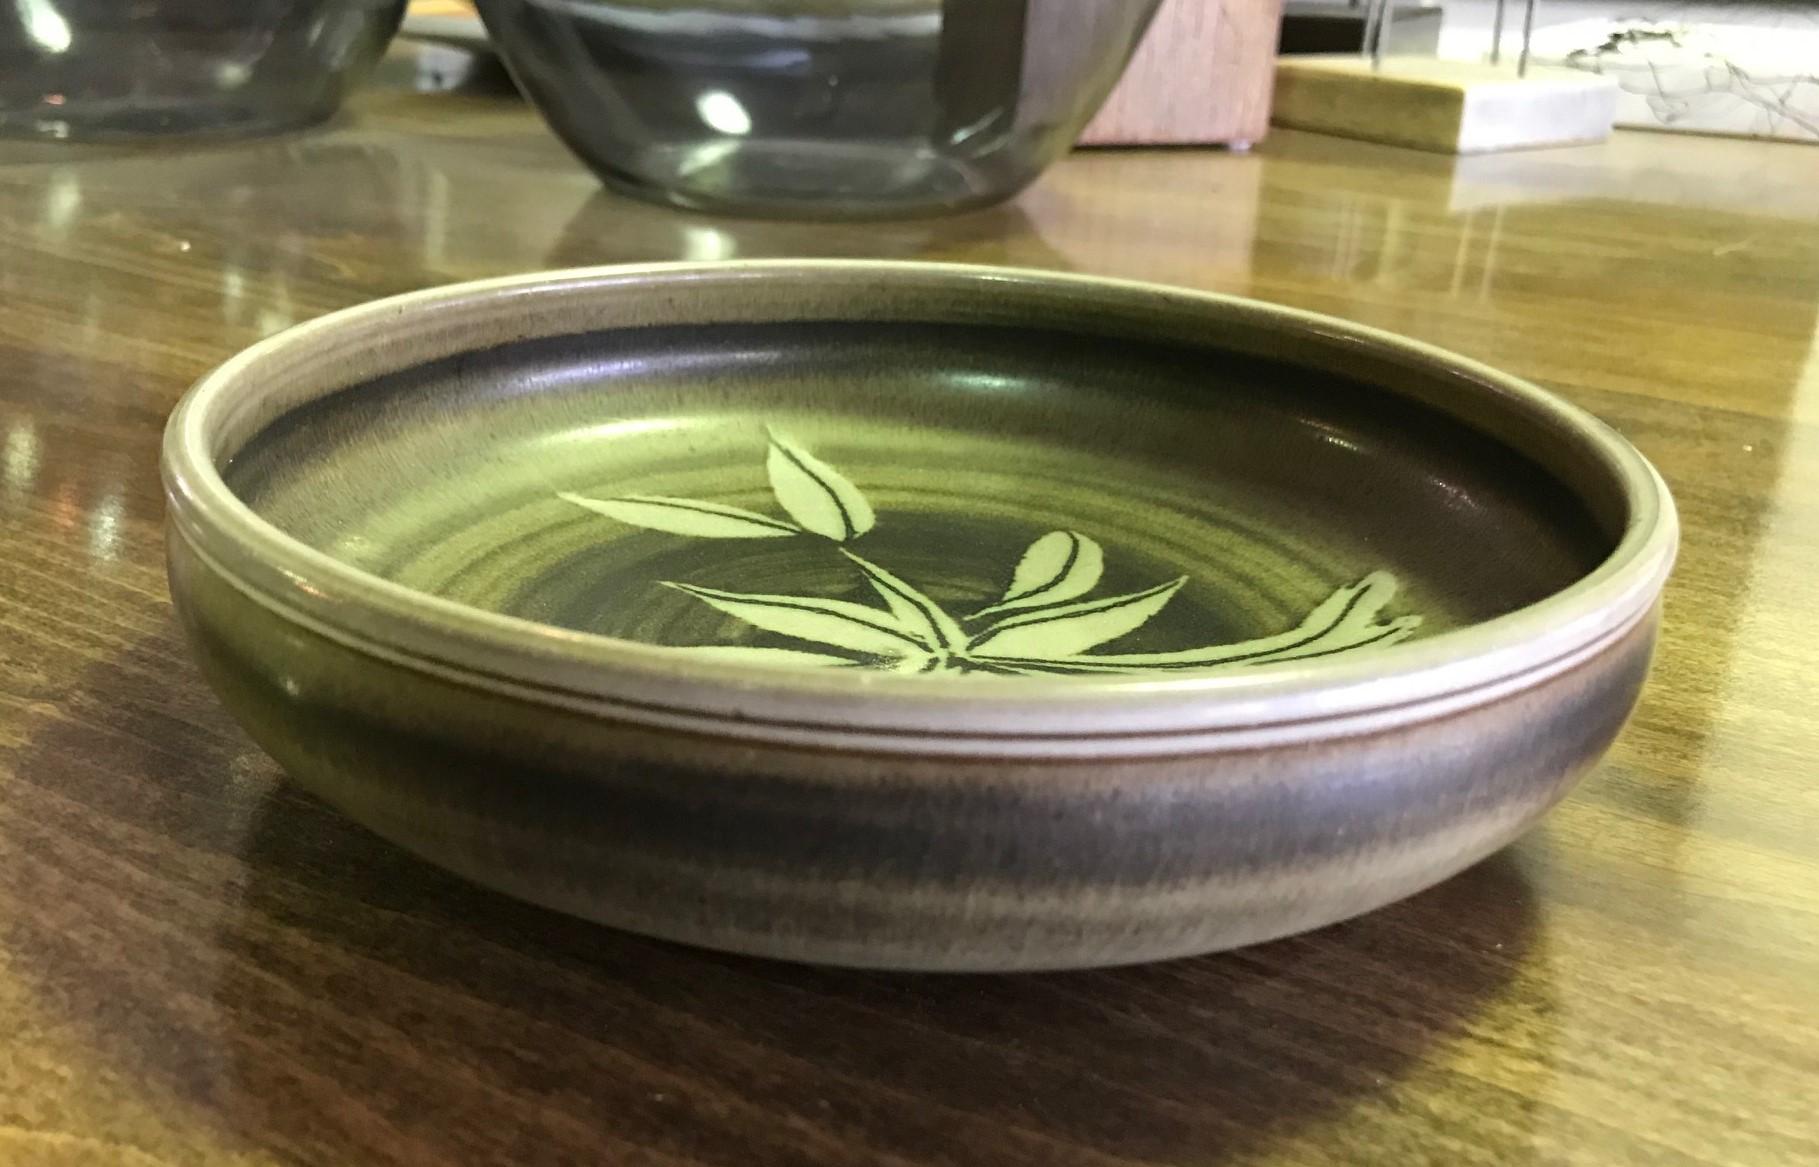 A gorgeous floral or leaf pattern decorated bowl by California master ceramist Rupert Deese who worked closely with pottery legend Harrison Mcintosh.

Signed with Deese's cipher/ stamp and sticker on the base.

Would be a great addition to any